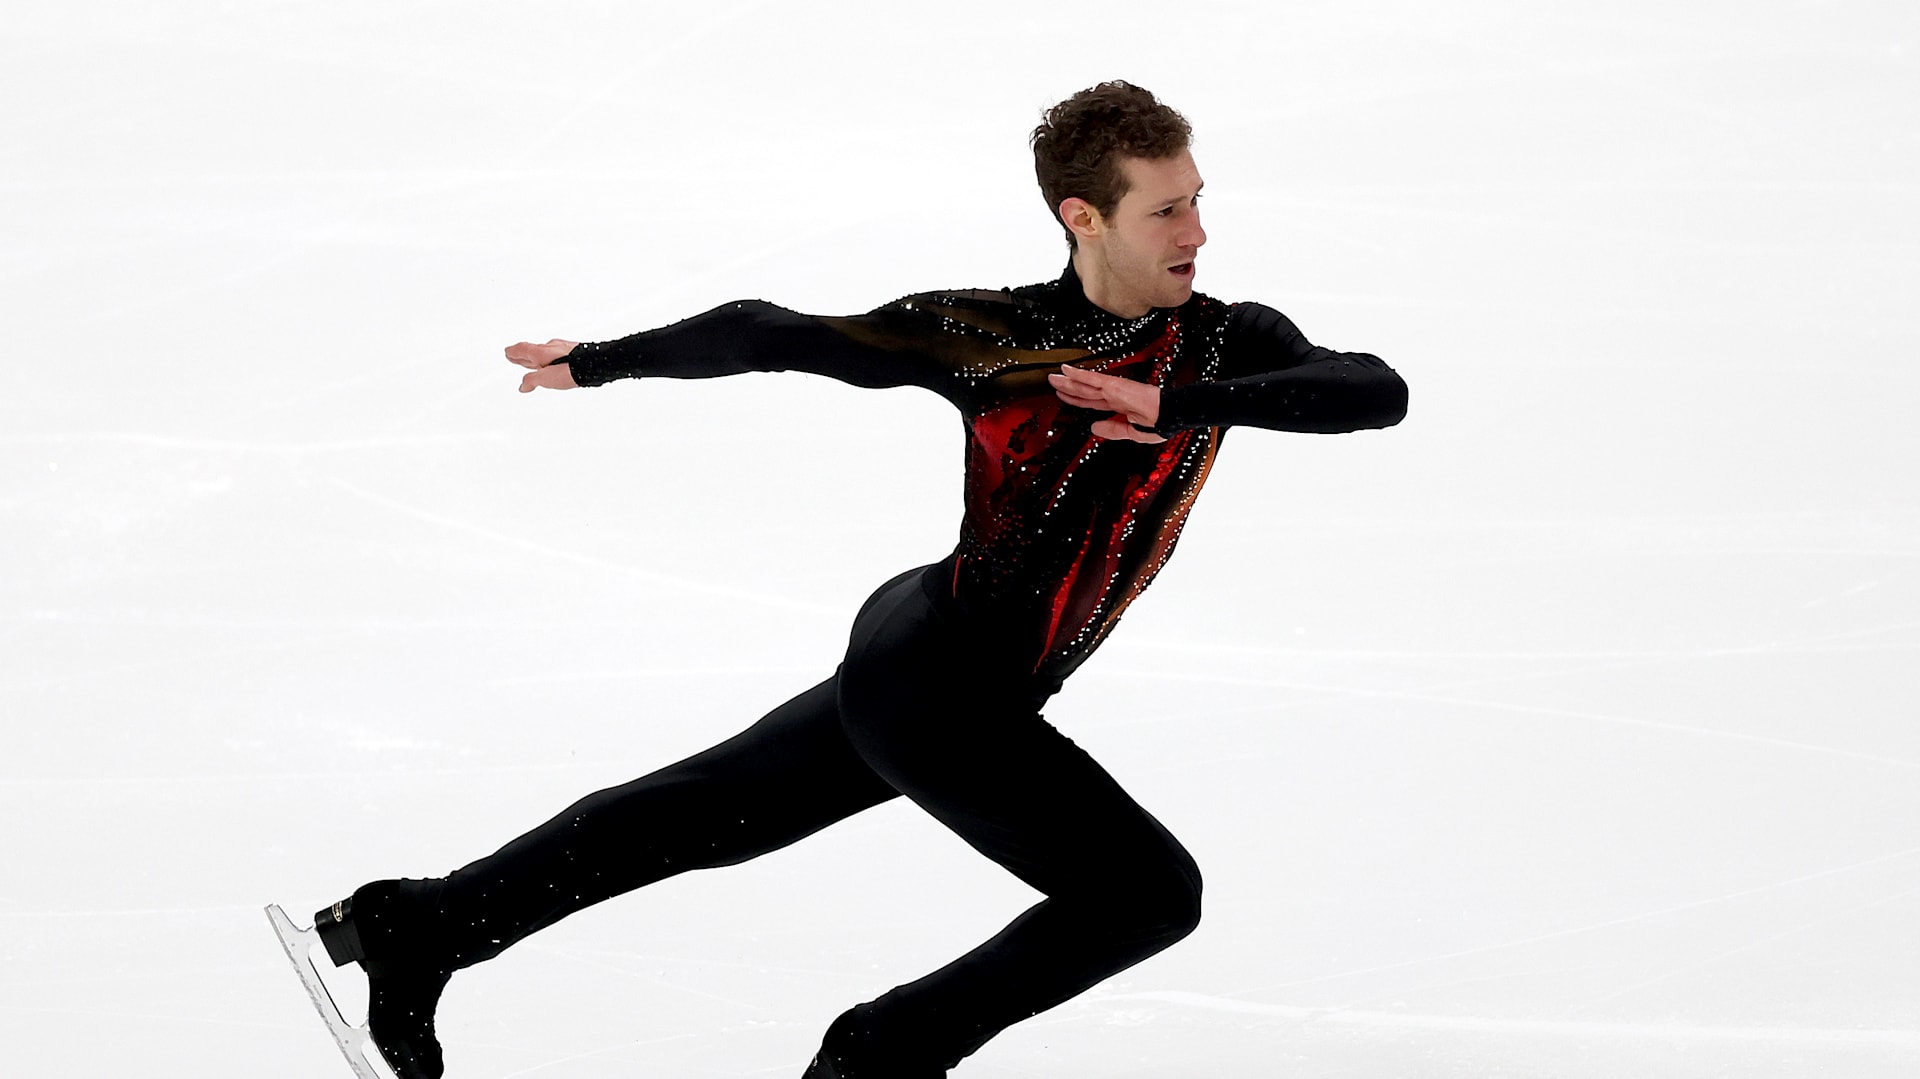 Jason Brown's free skate makes statement, cements his legacy